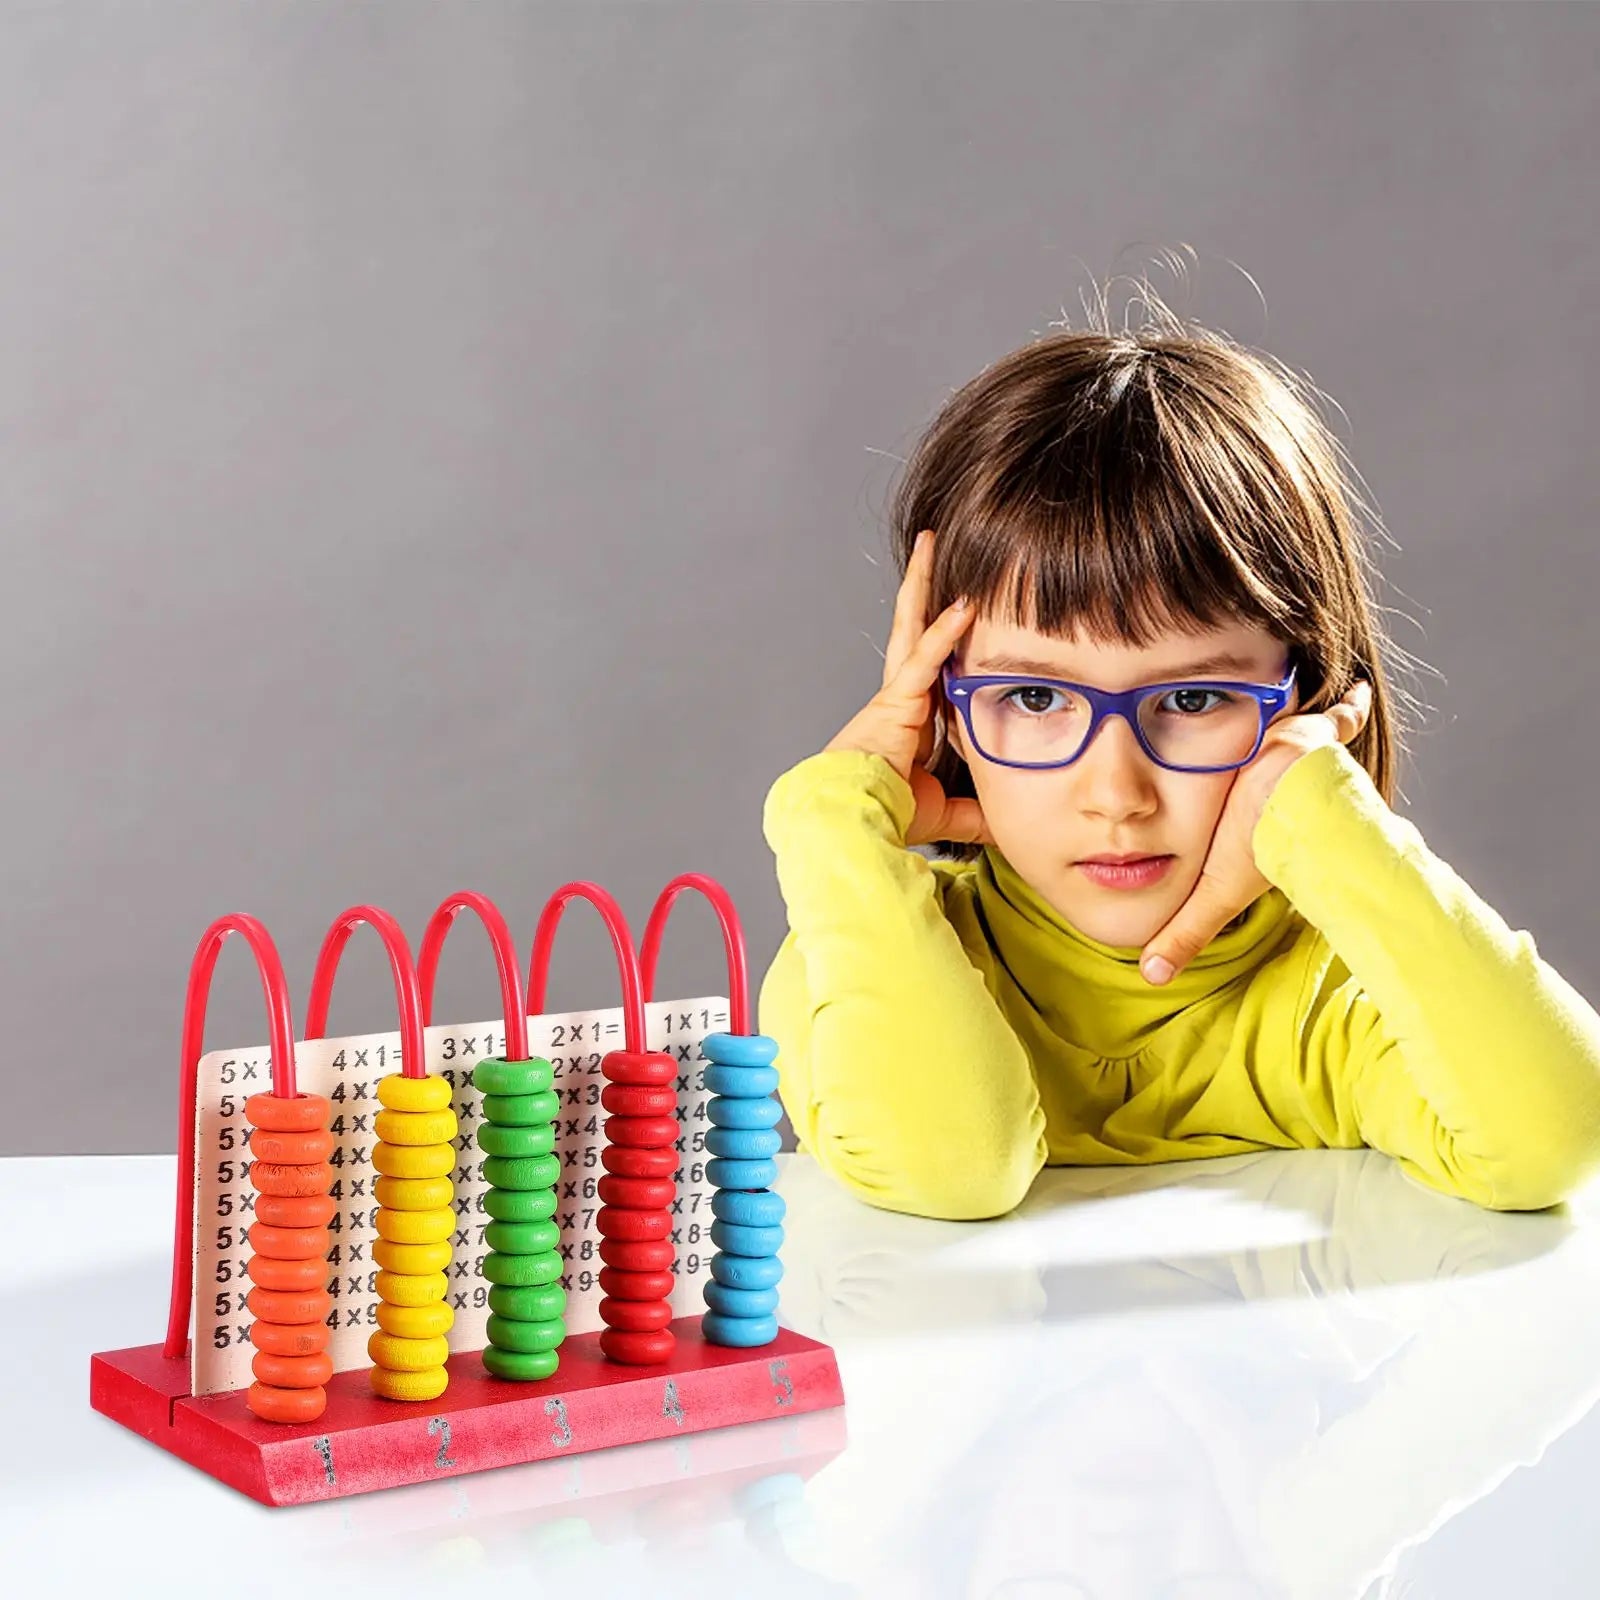 Colorful Wooden Abacus Toy for Children - Enhancing Math Skills and Numeracy - ToylandEU